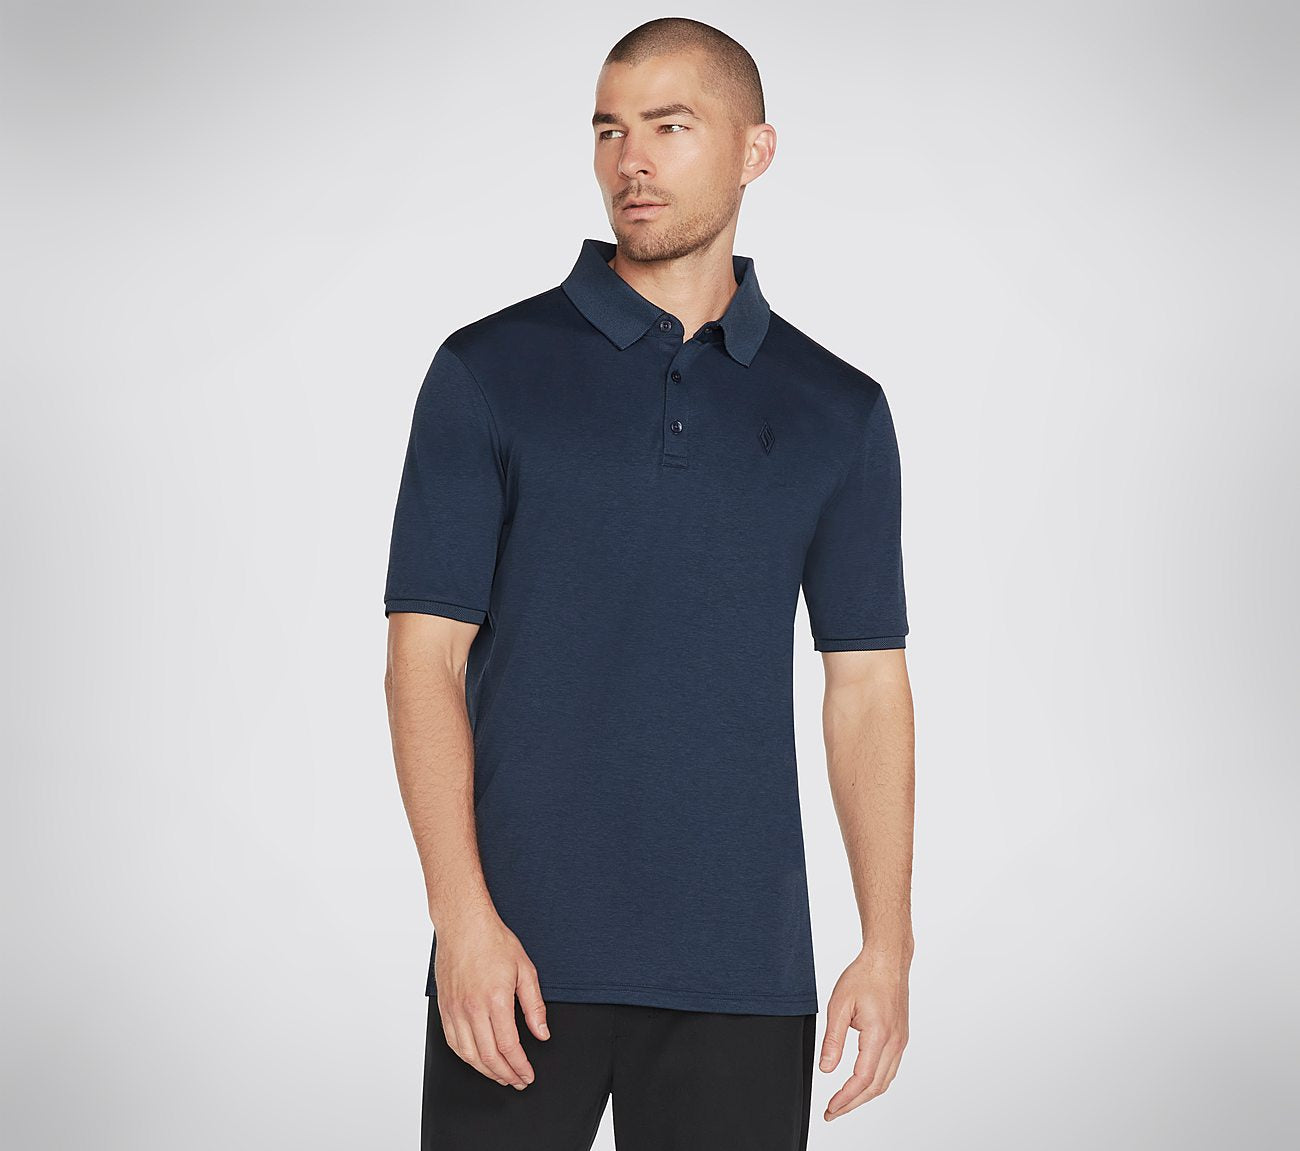 Skechers Apparel Off Duty Polo Shirt Clothes Skechers